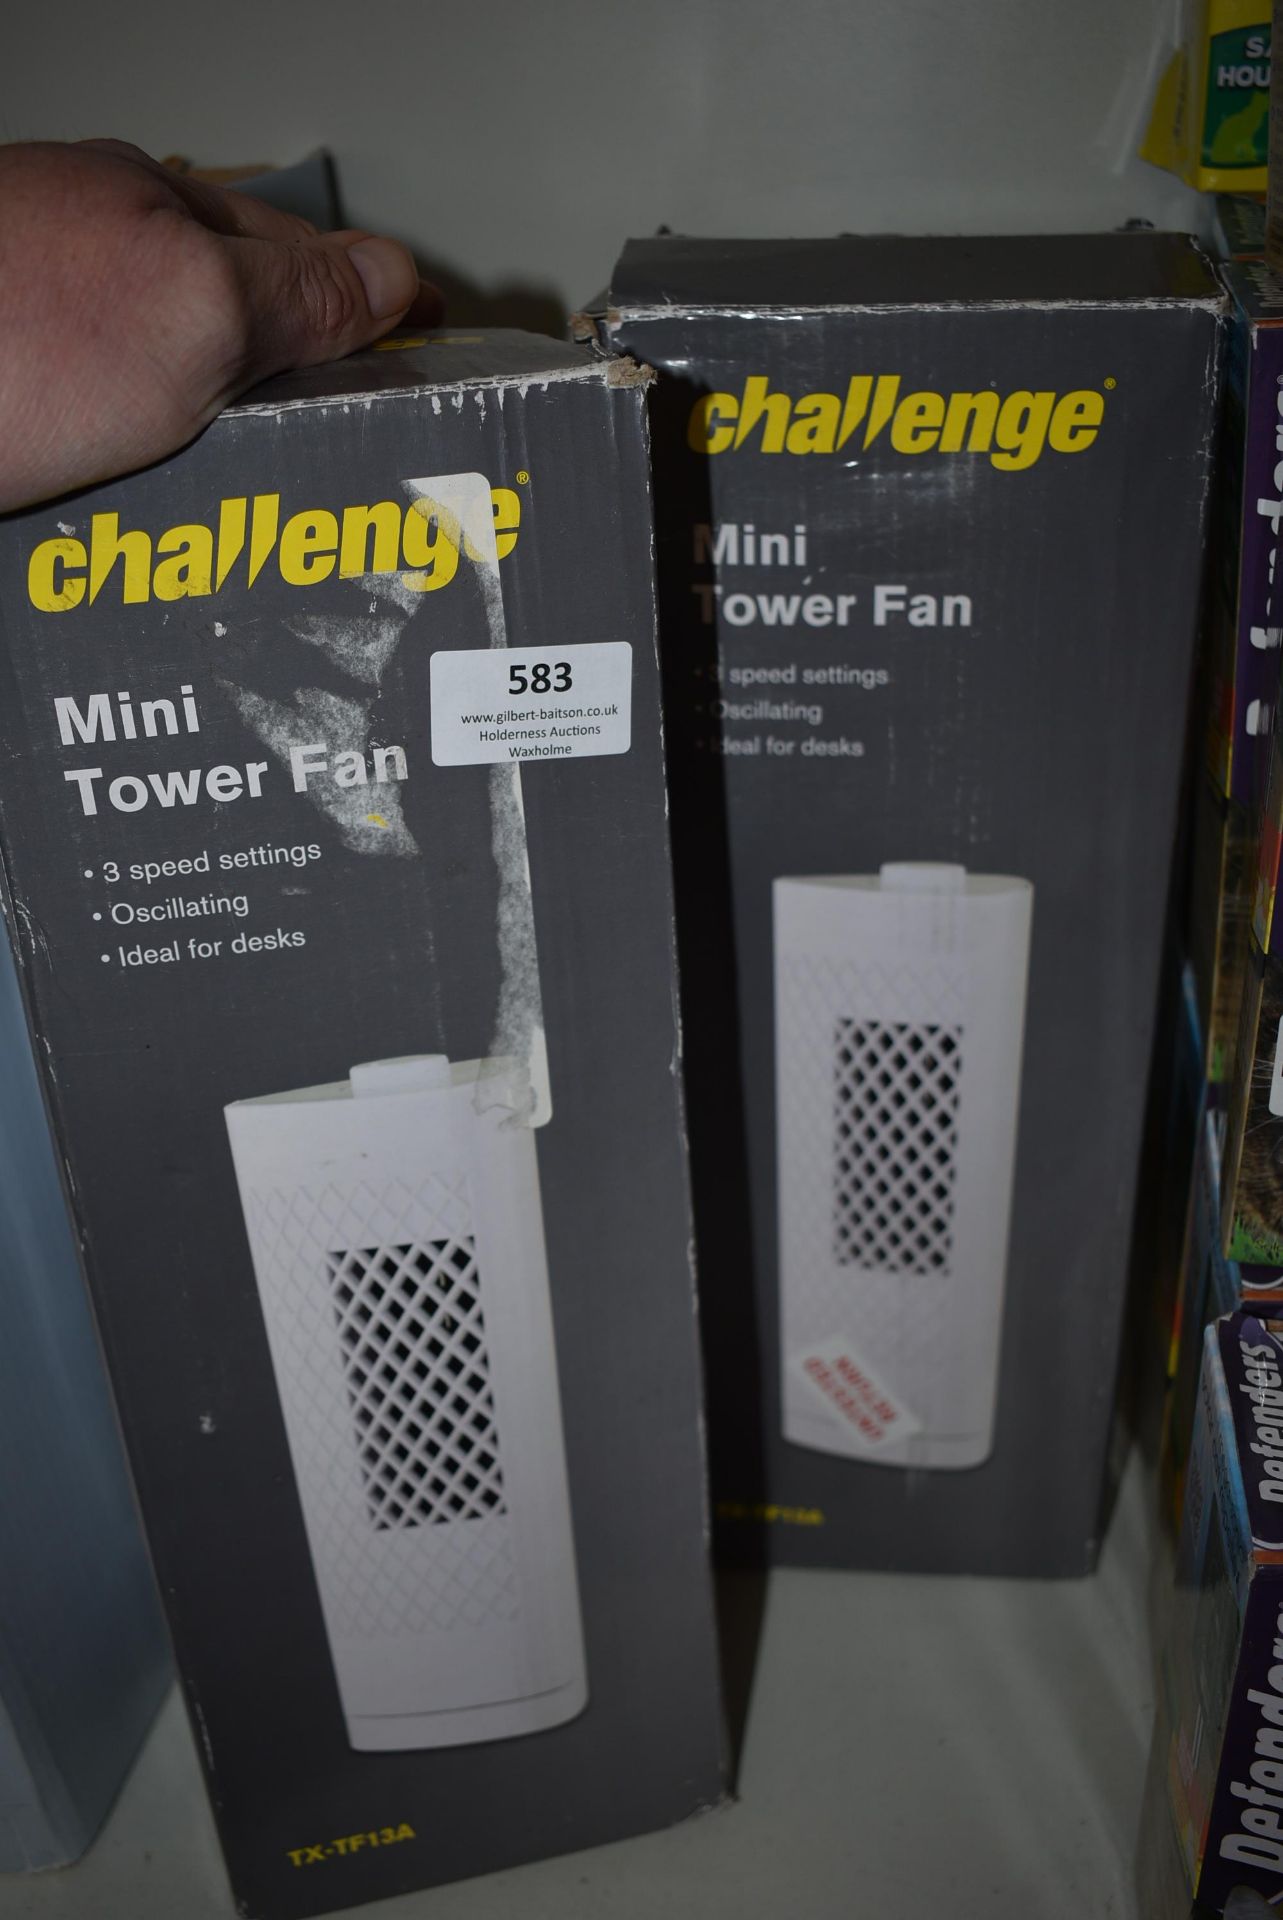 Two Challenge Mini Tower Fans - Image 2 of 2